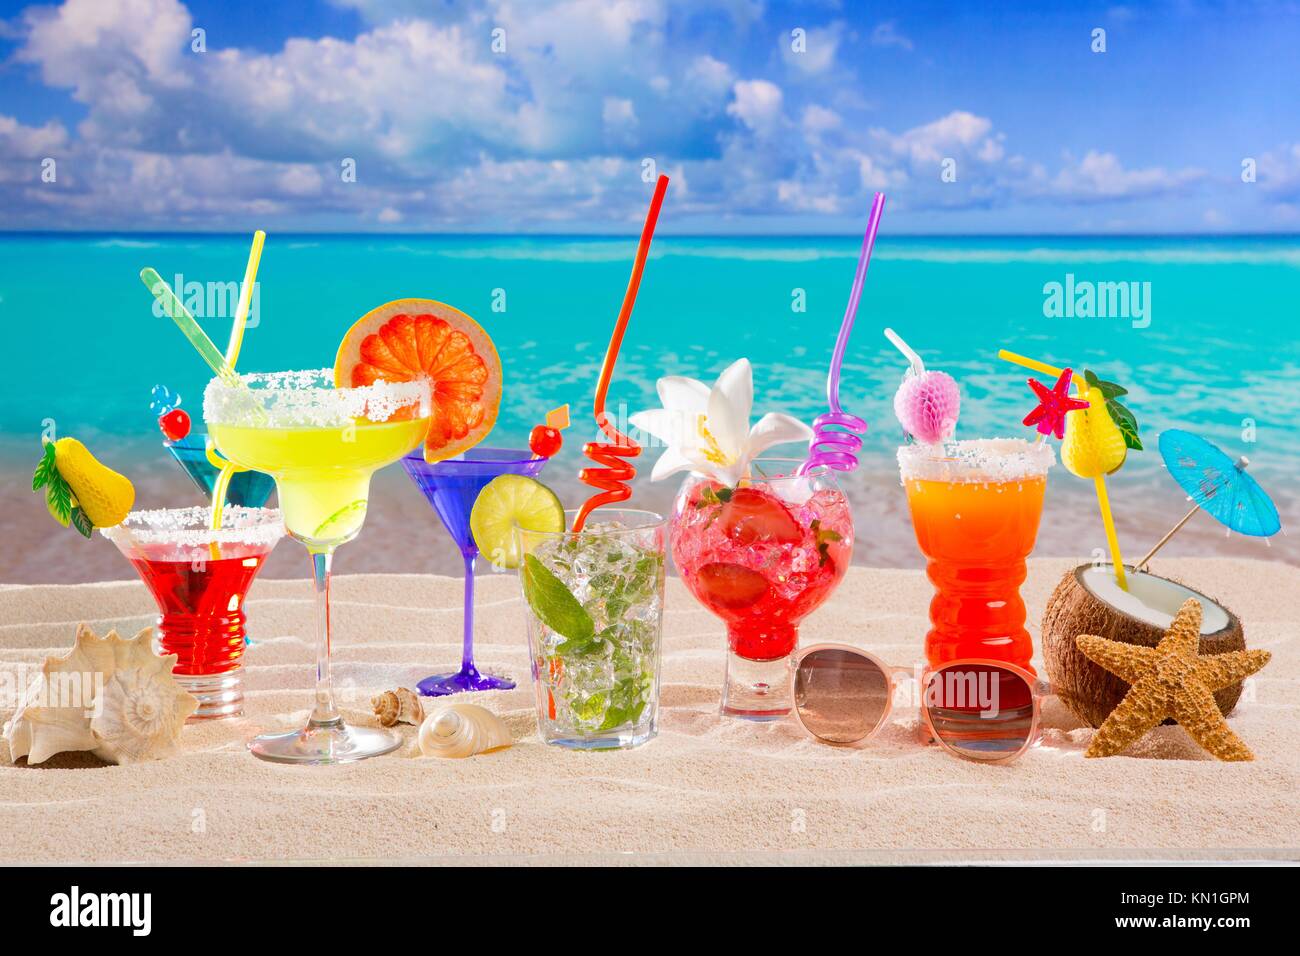 Colorful tropical cocktails at beach on white sand and turquoise water ...